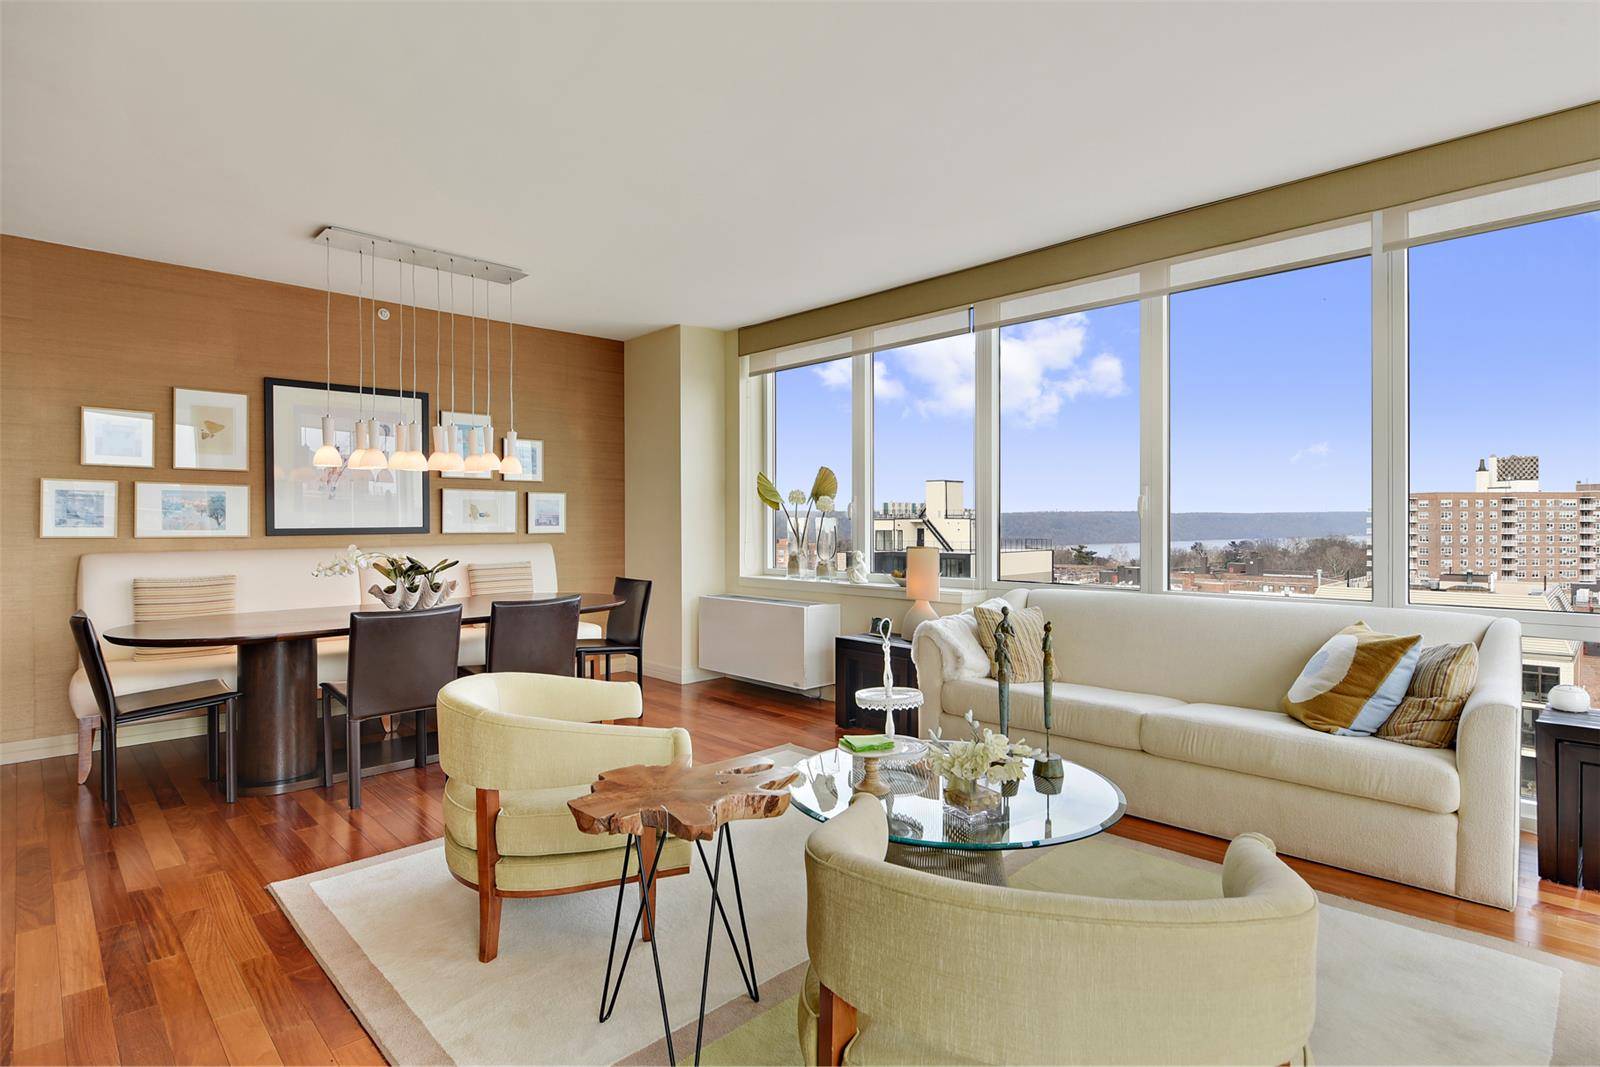 Move in ready corner 2 bedroom, 2 bath luxury condo residence with a terrace.